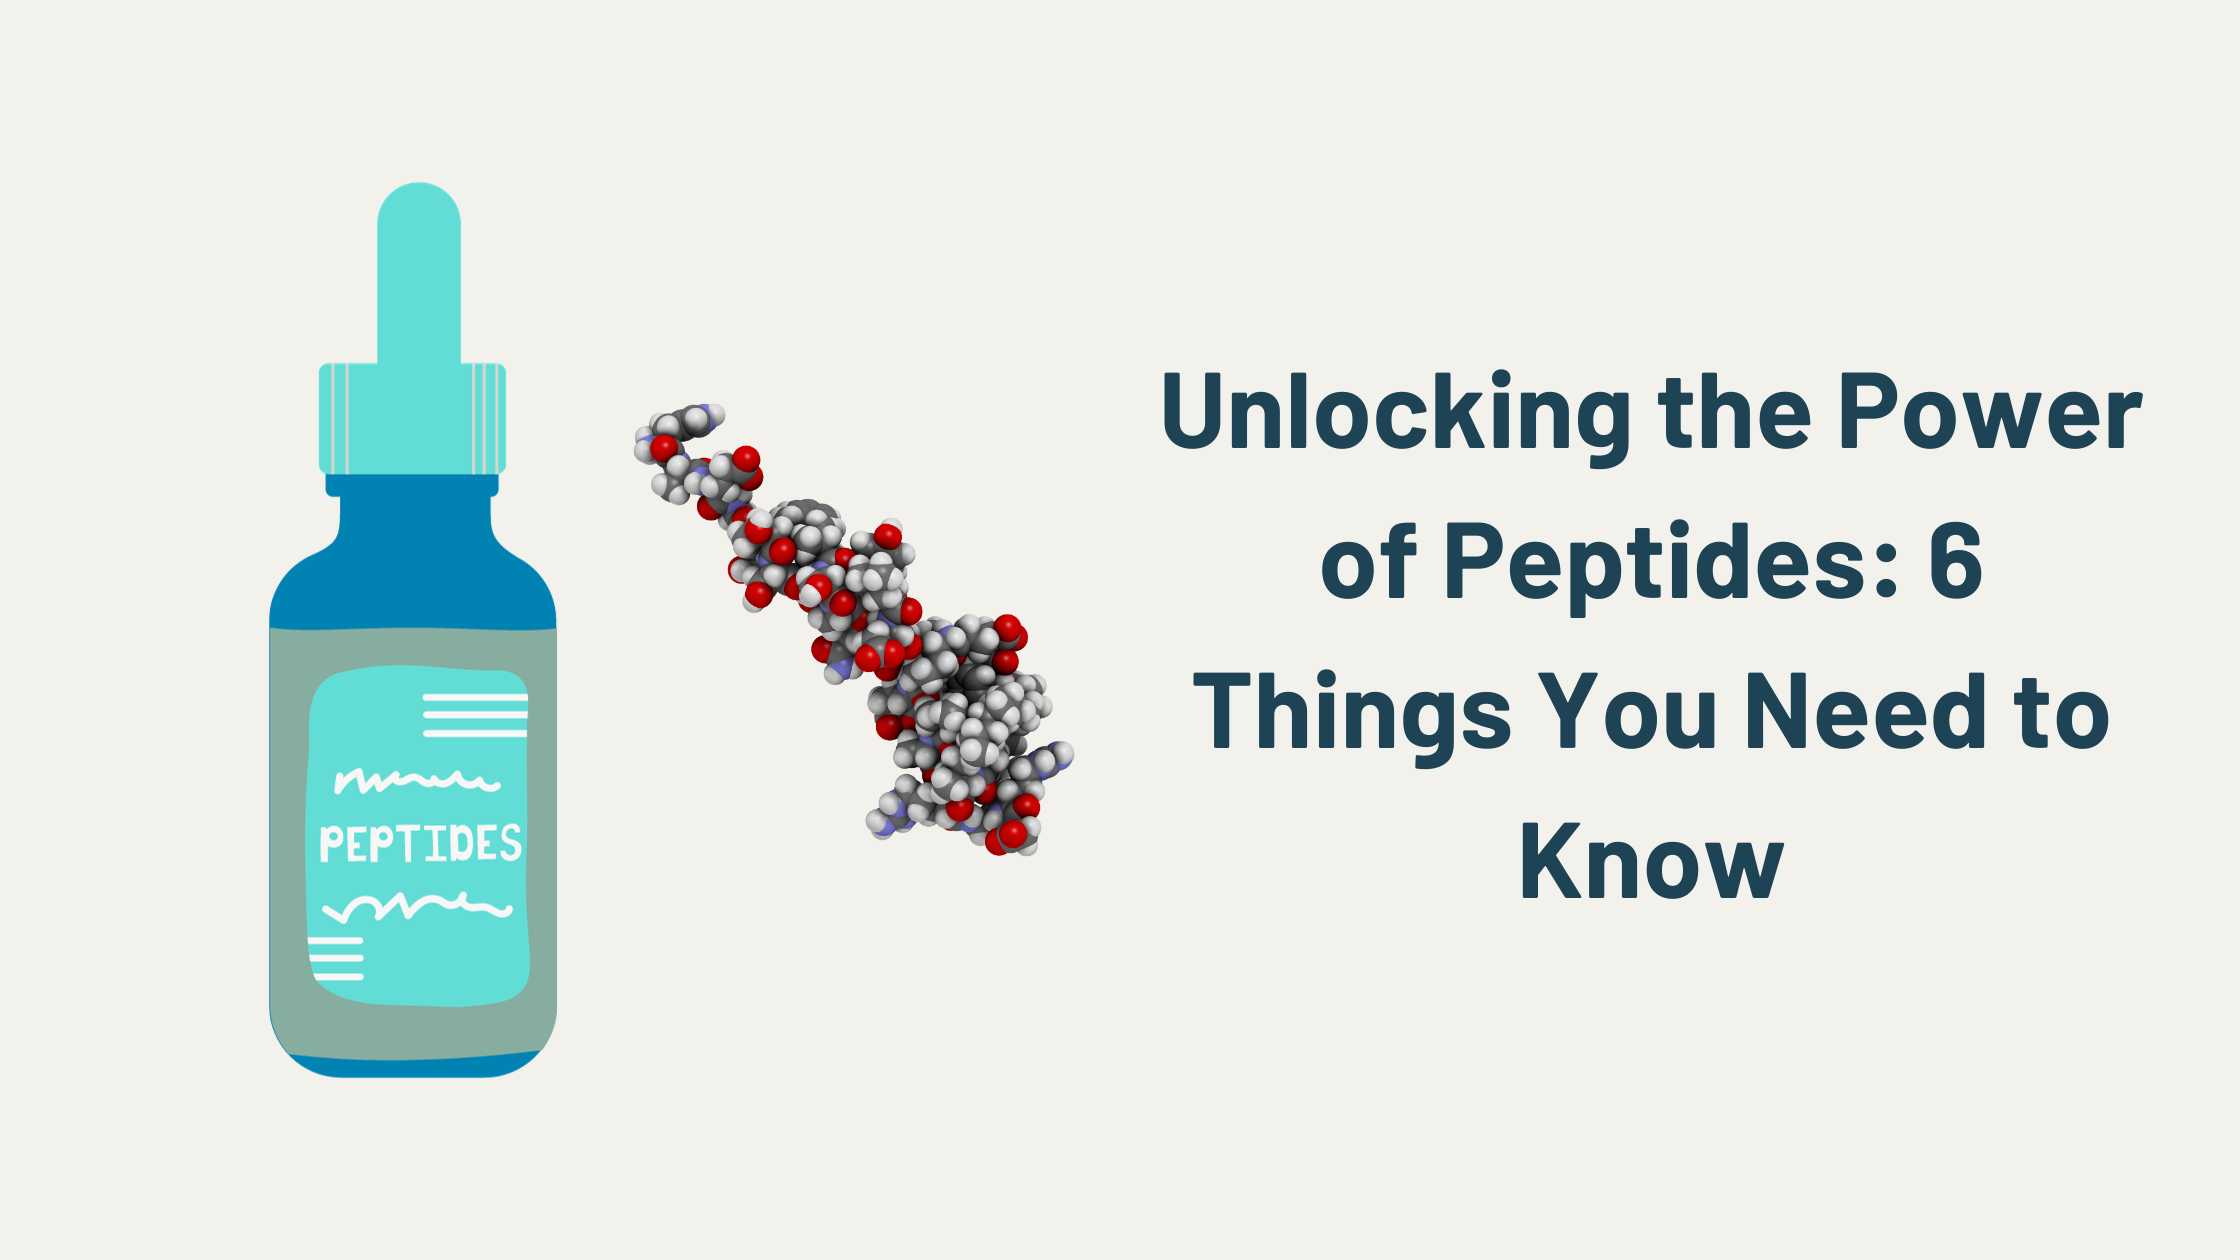 Unlocking the Power of Peptides: 6 Things You Need to Know